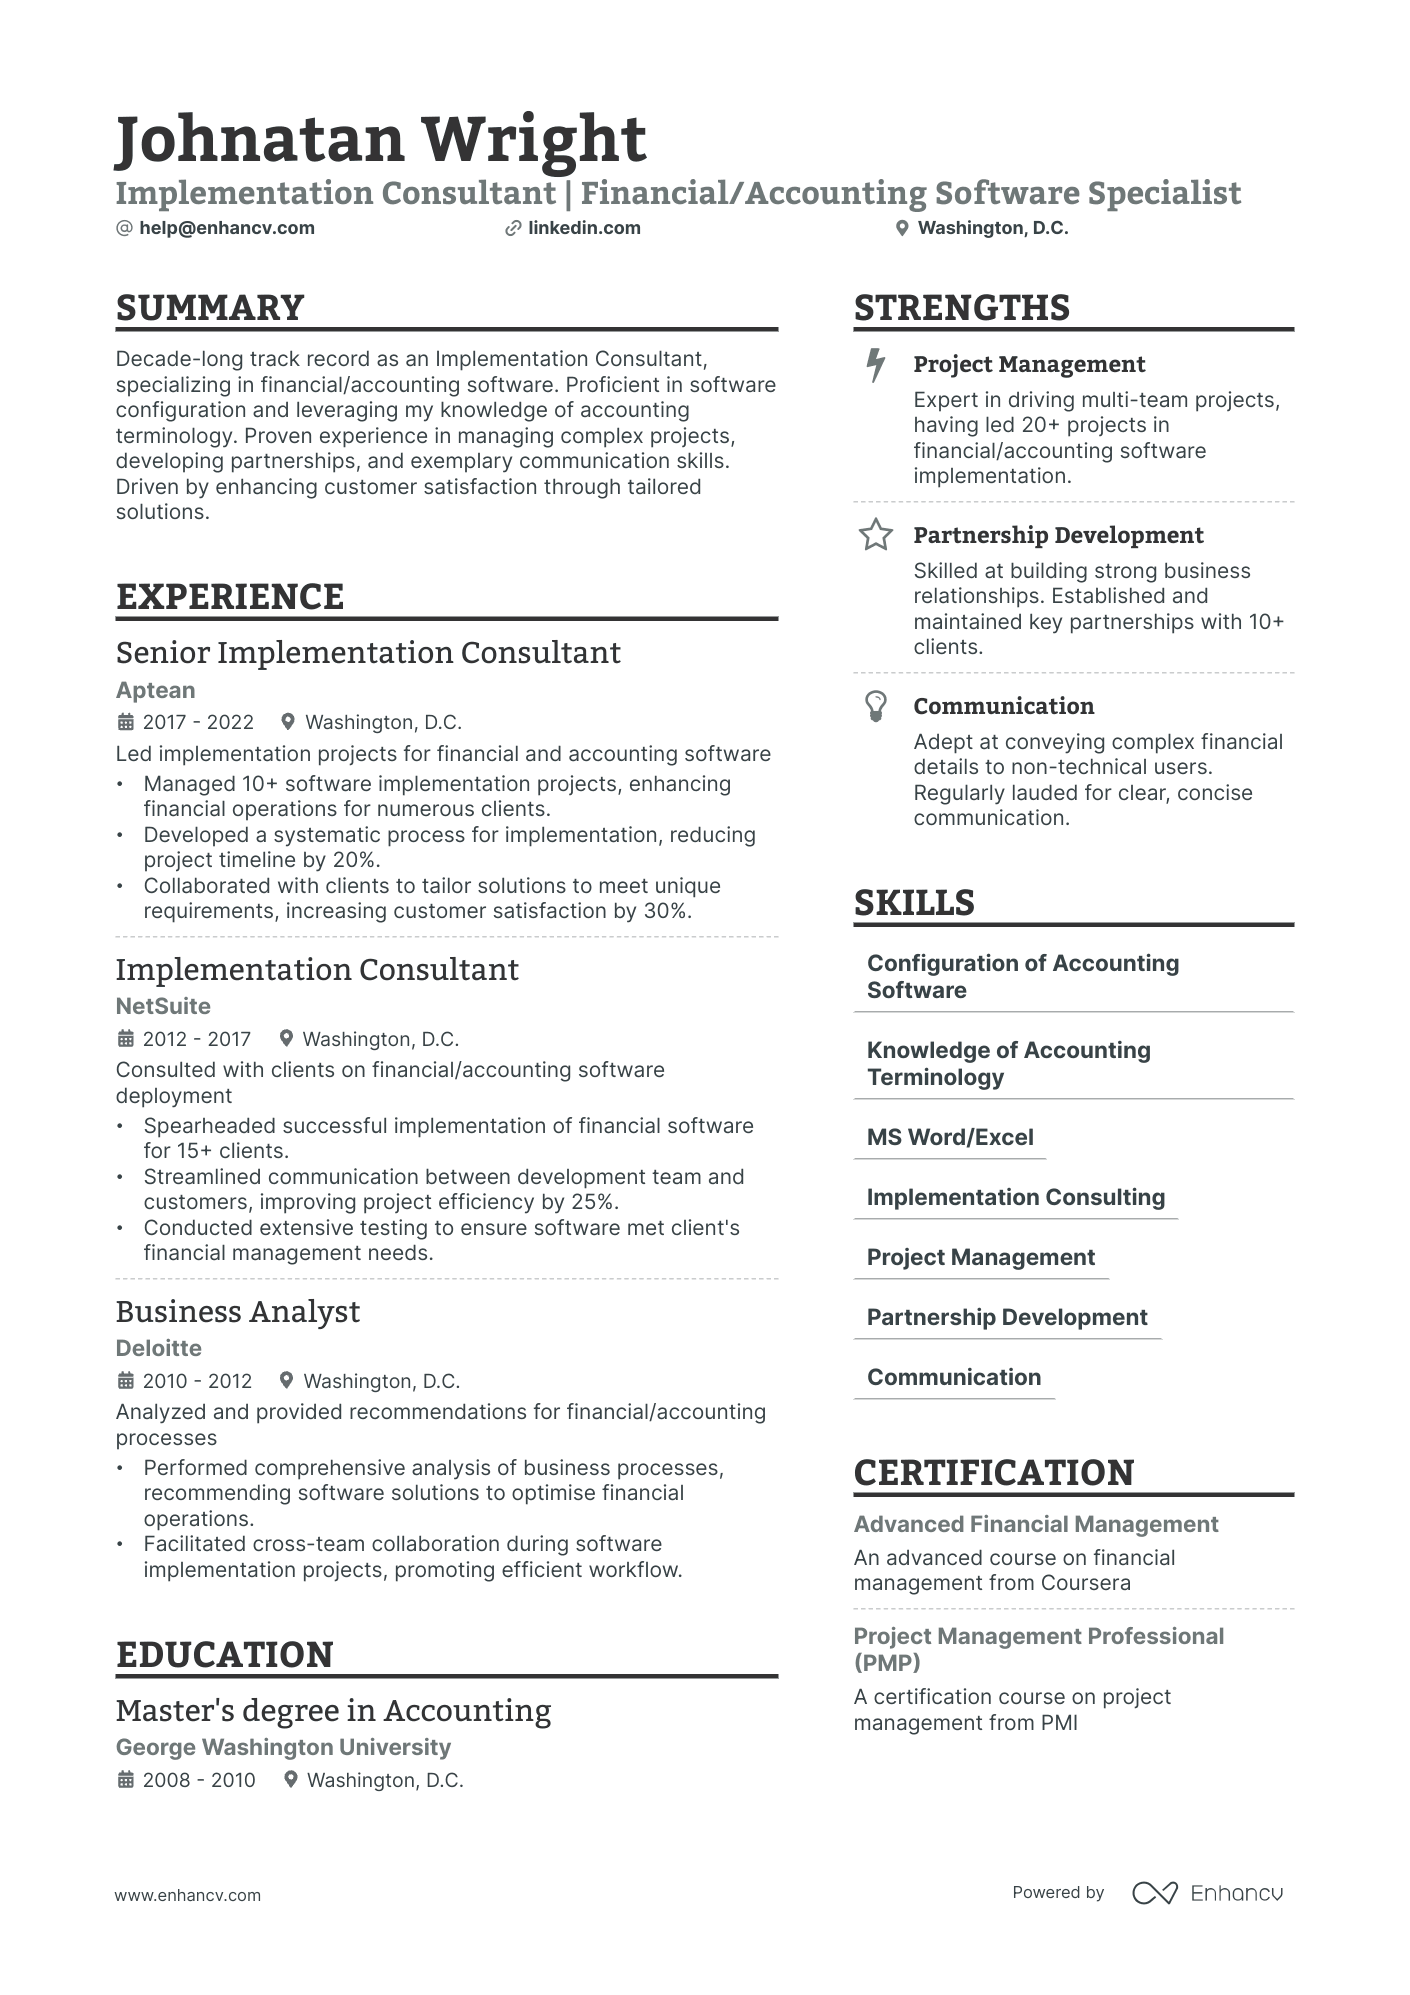 Implementation Consultant resume example